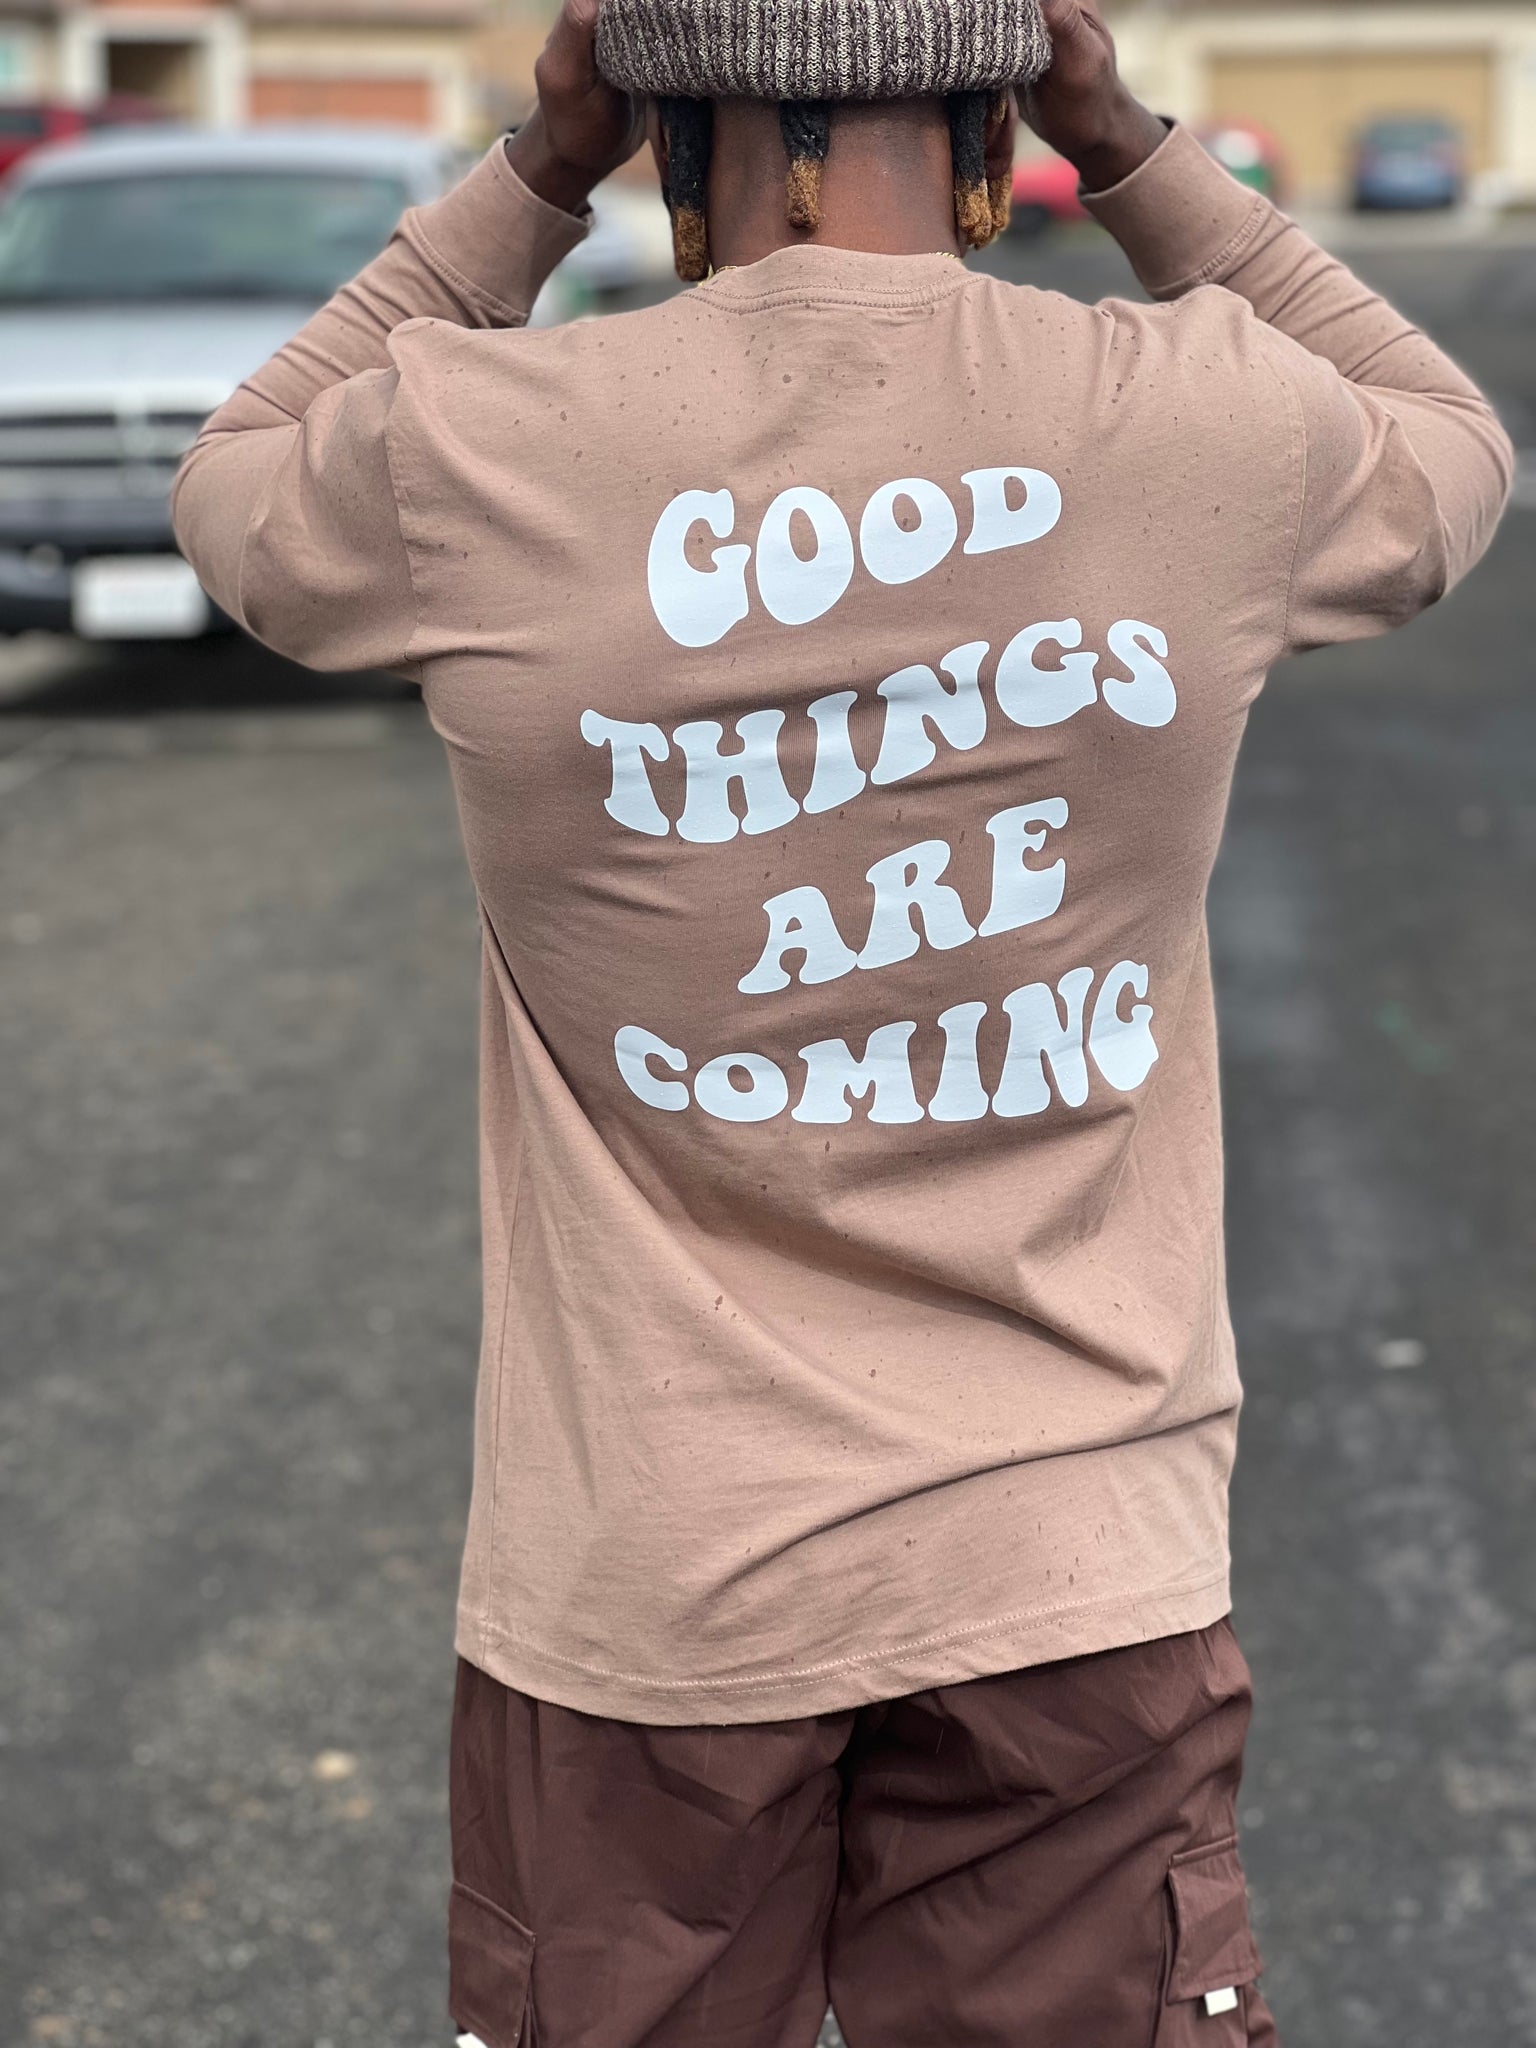 Good things are Coming